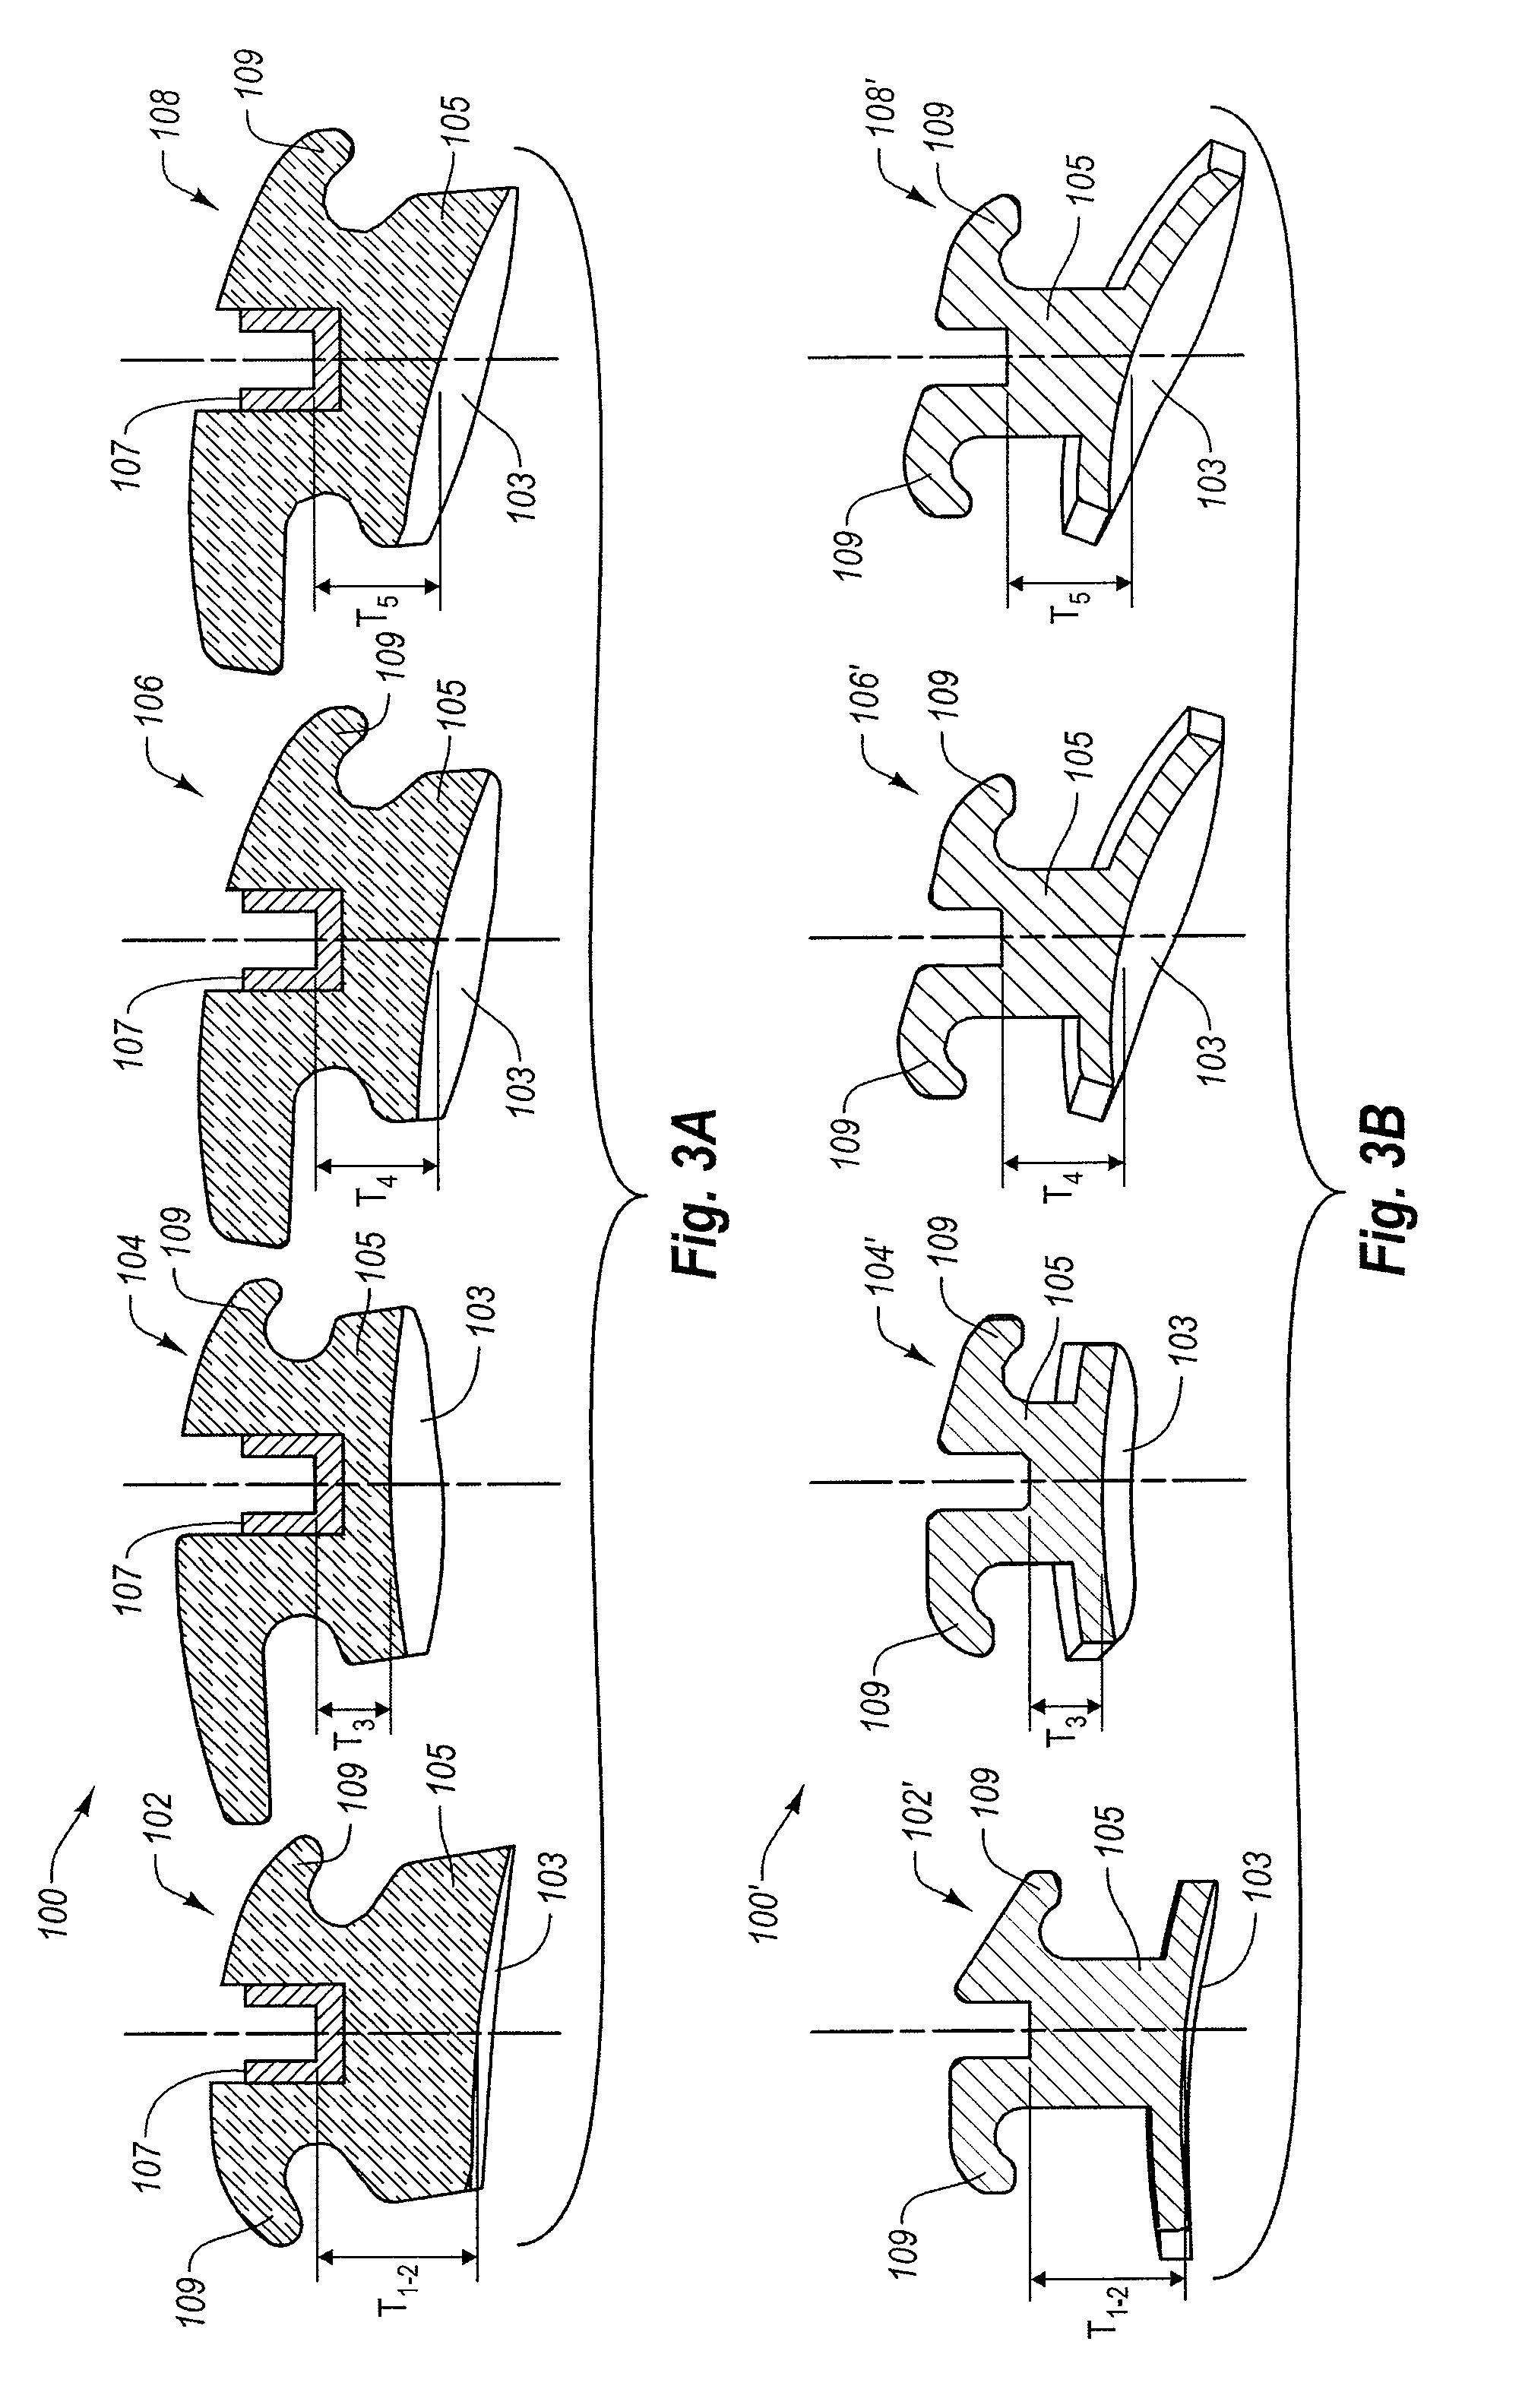 Coordinated metal and ceramic orthodontic bracket systems